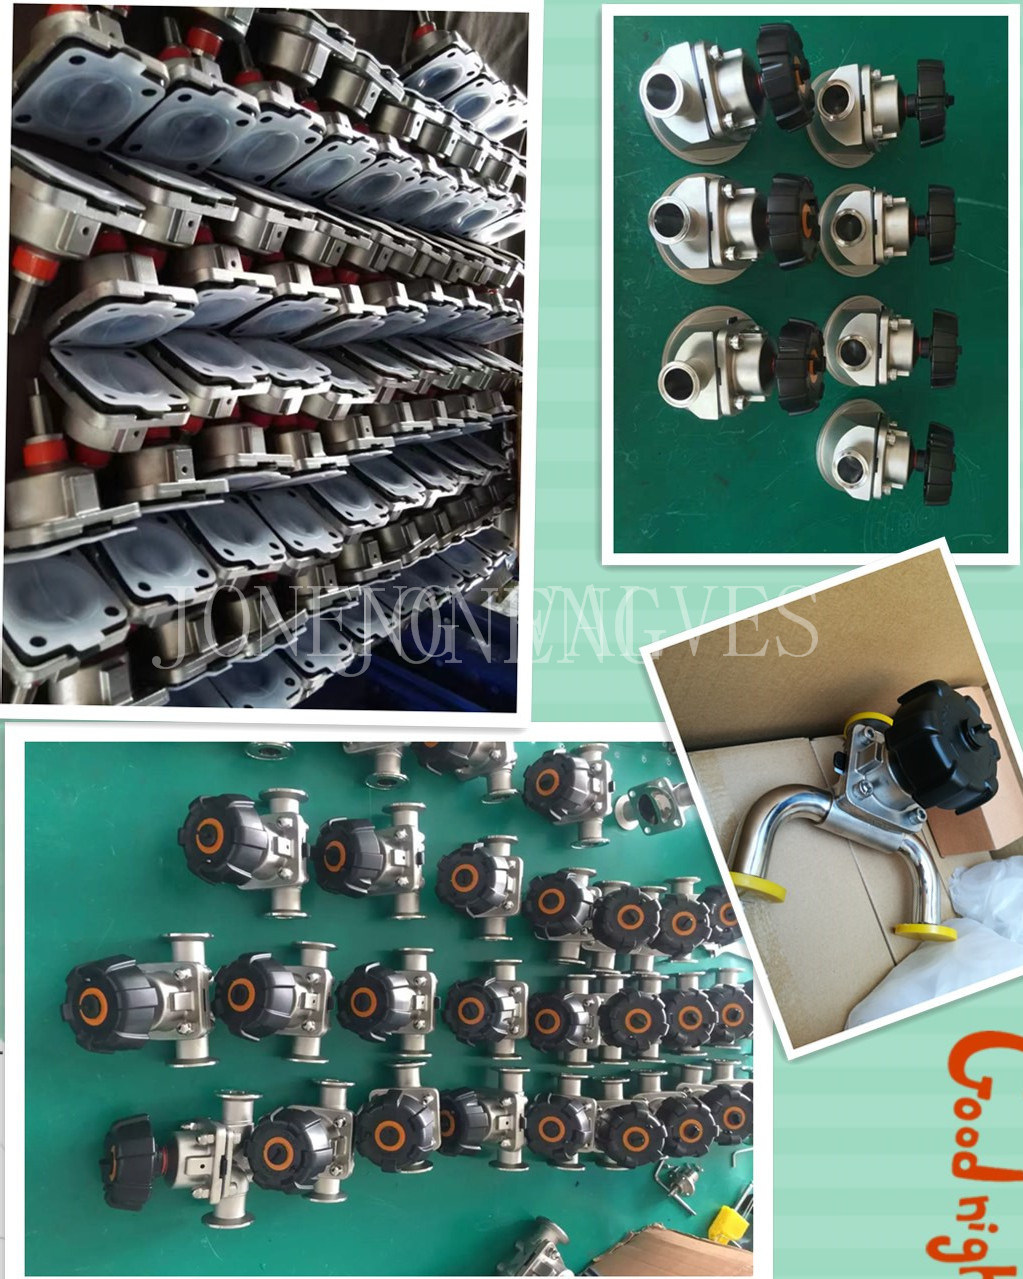 China Stainless Steel Pneumatic & Manual Food Grade & Hygienic Sanitary Ball & Diaphragm & Butterfly Control Valve (JN-1006)